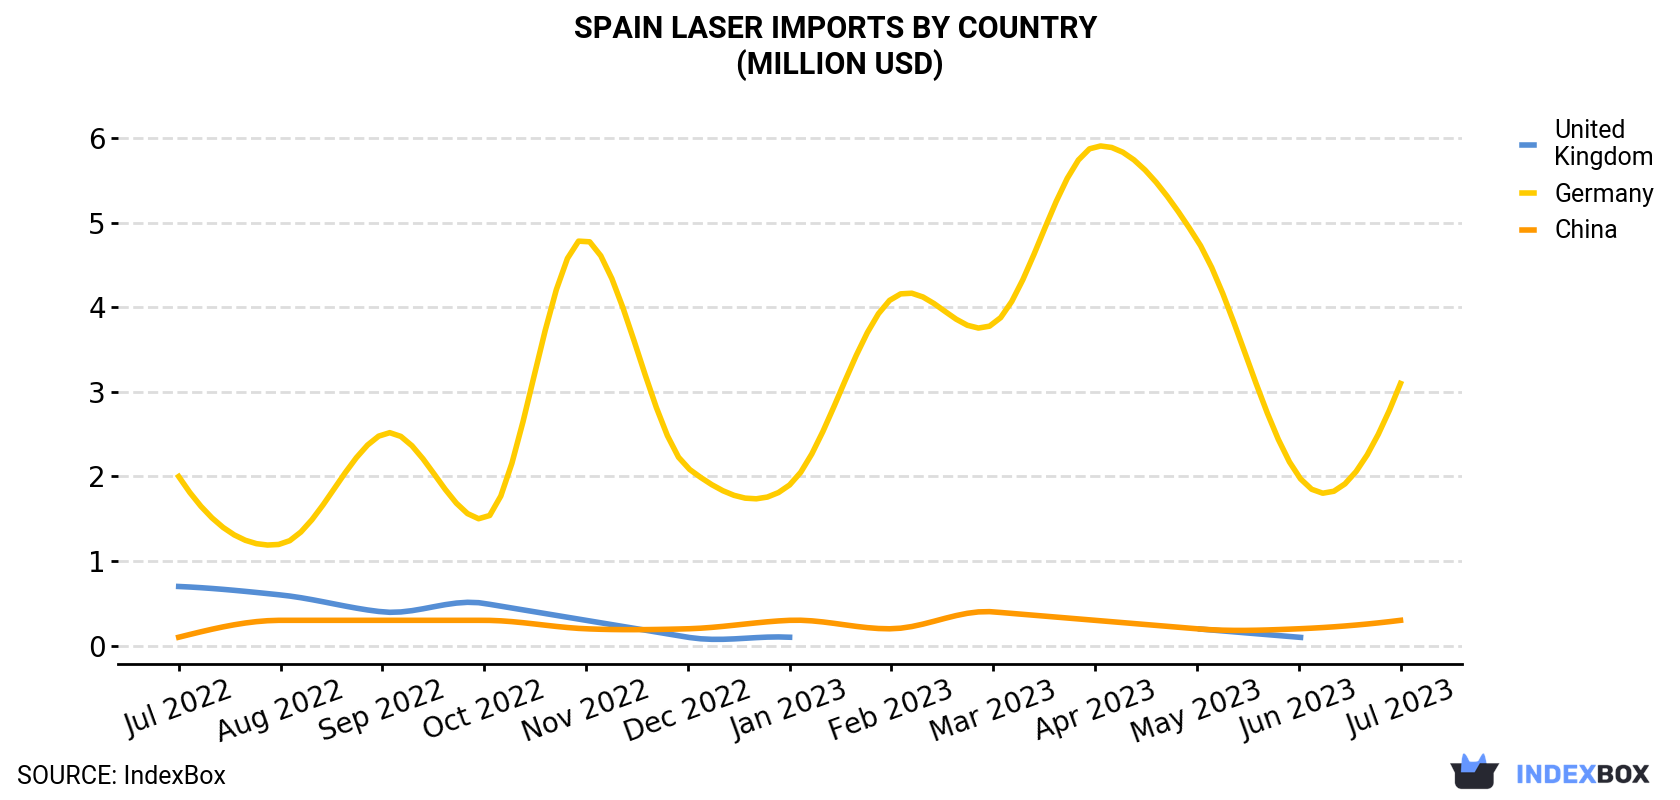 Spain Laser Imports By Country (Million USD)